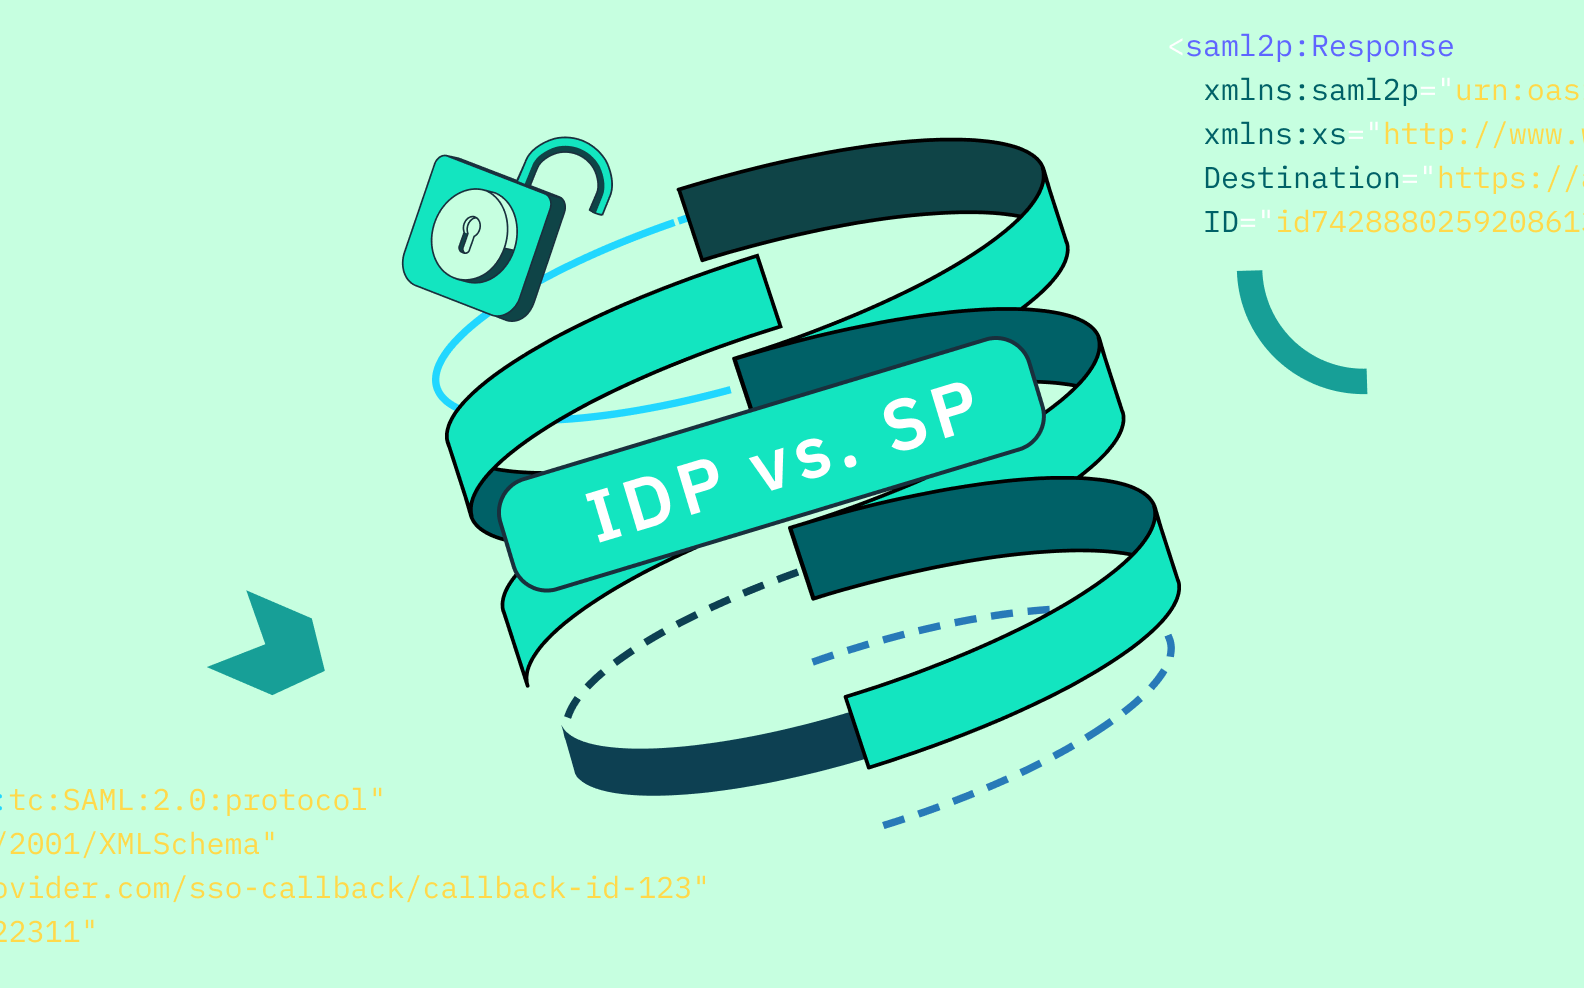 A swirl of locks with some code snippets on a green background, with the title "IdP vs. SP" centered in the middle